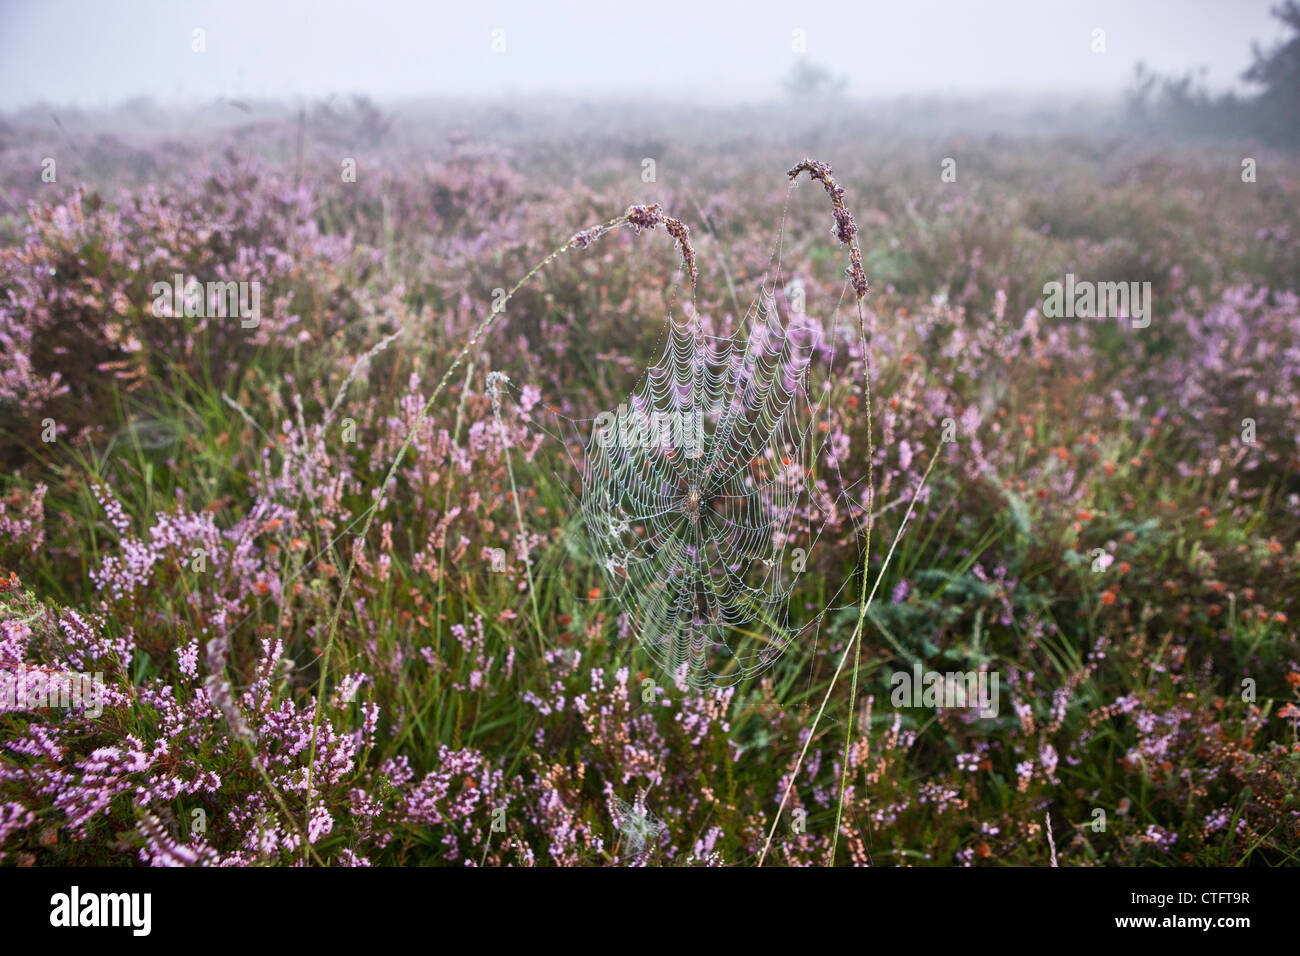 The Netherlands, Bussum, Early morning, flowering heath. Spider web. Stock Photo